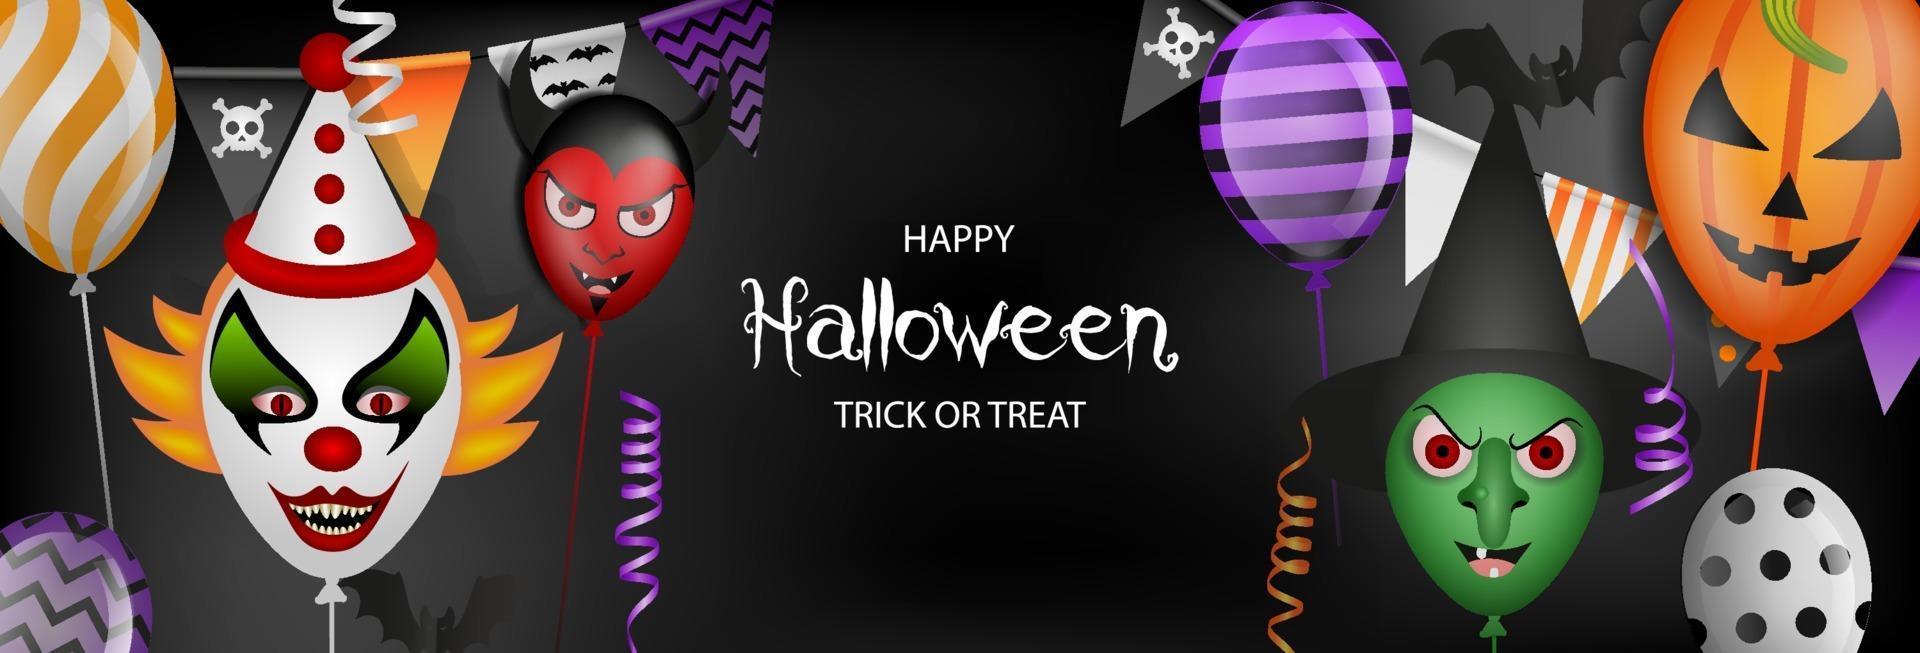 happy halloween banner with party balloons, streamers and pennants vector